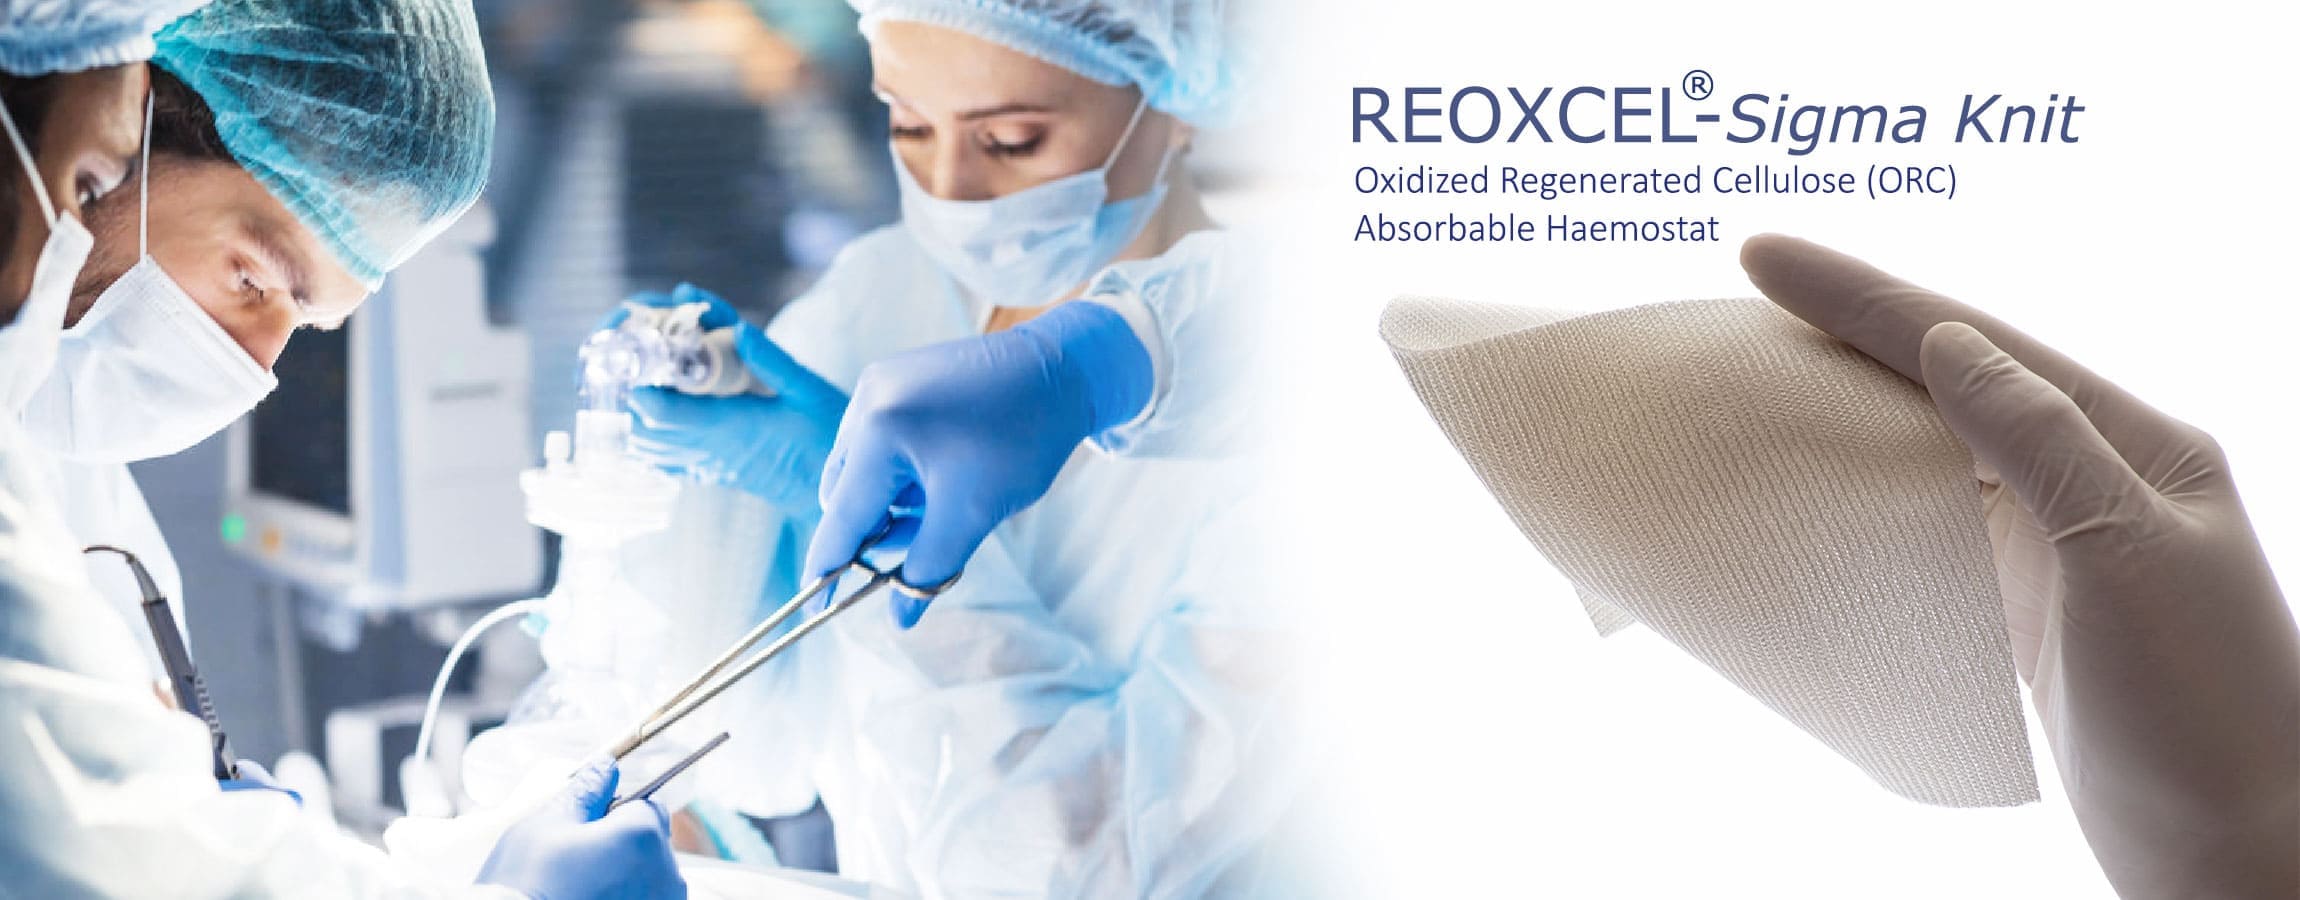 Reoxcel Sigma Knit Absorbable and Sterile Haemostat Usage In Surgerys